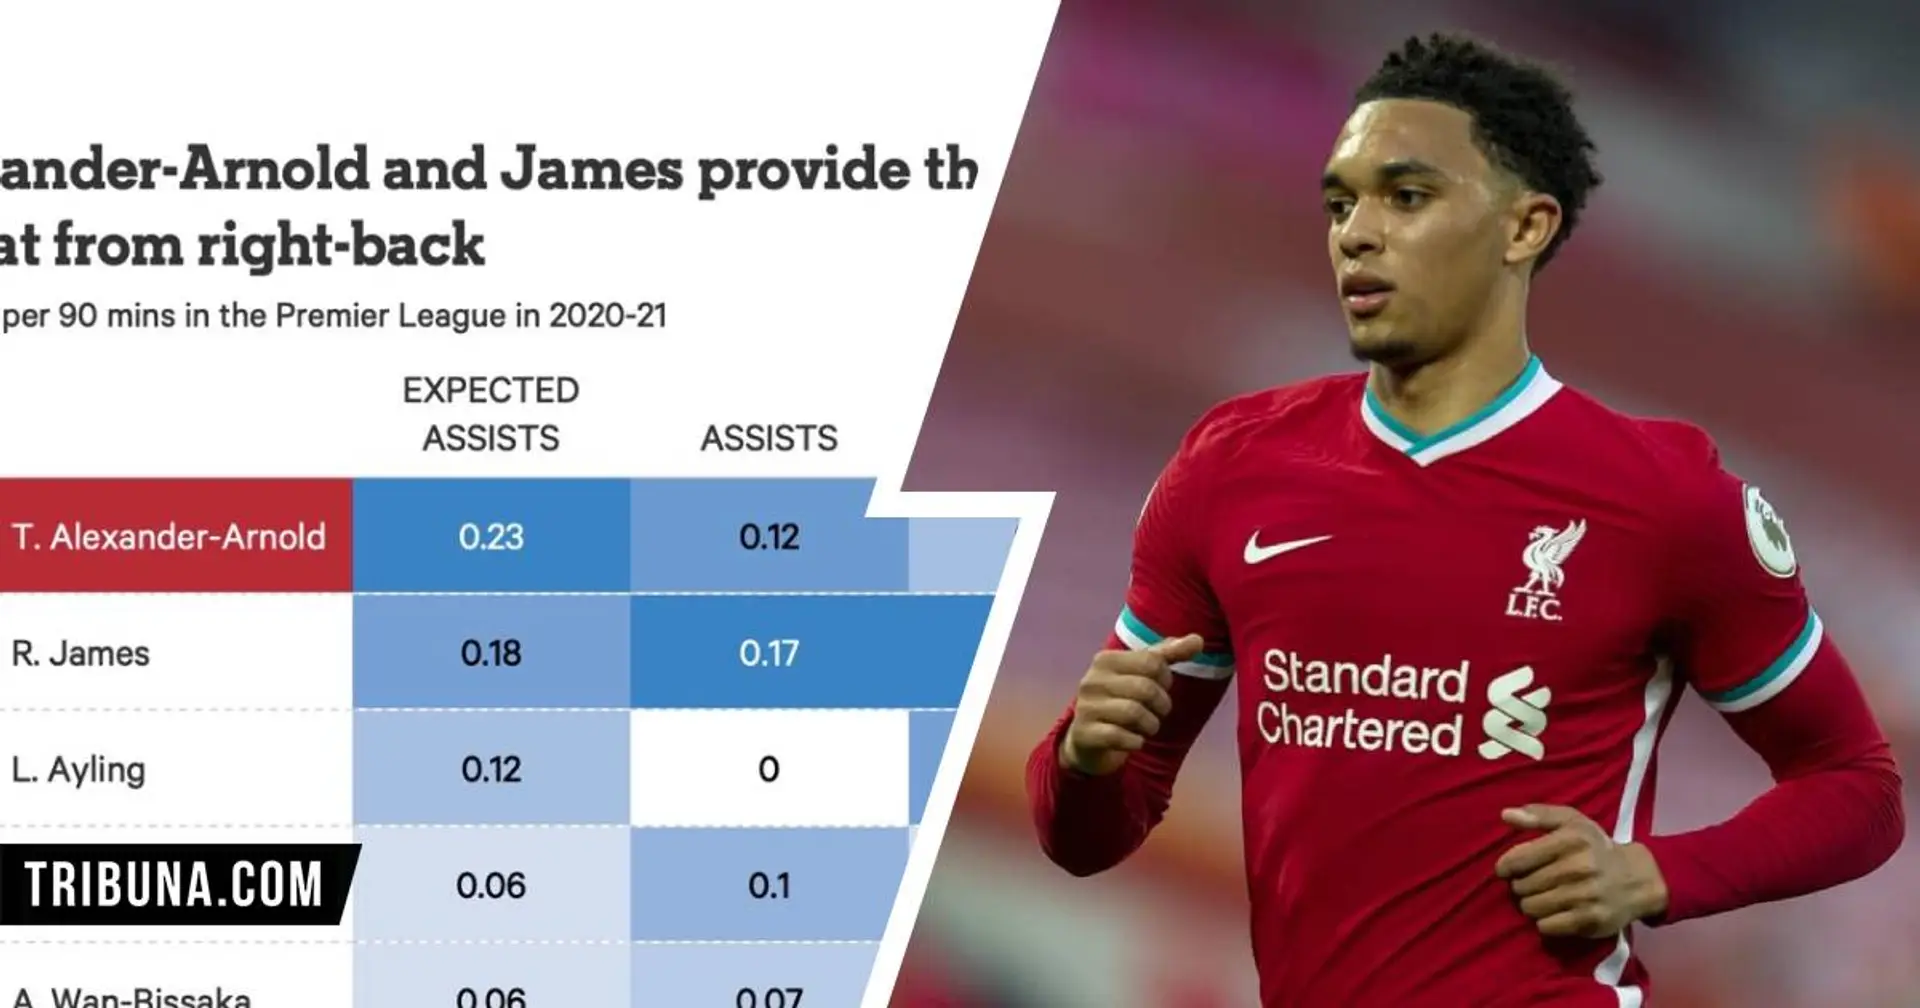 2 key graphs that prove why Trent remains one of the best right-backs in England